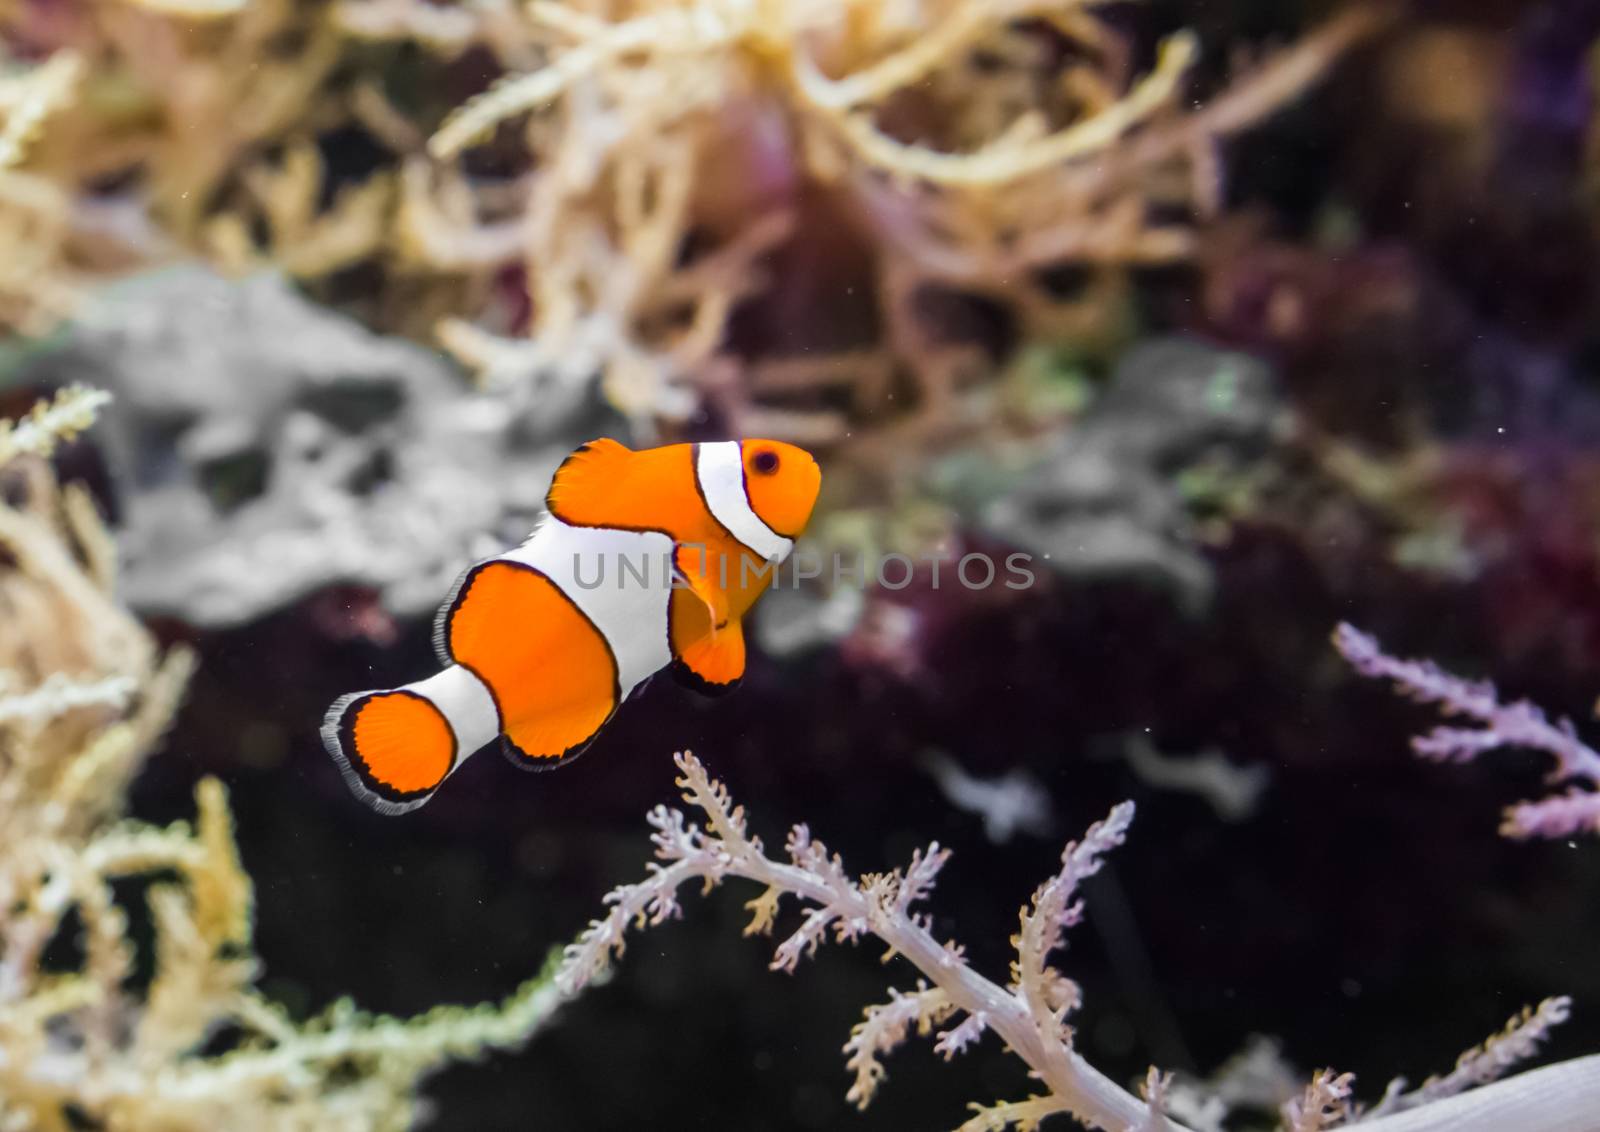 common false percula clownfish also known as clown anemonefish, swimming in the water. by charlottebleijenberg